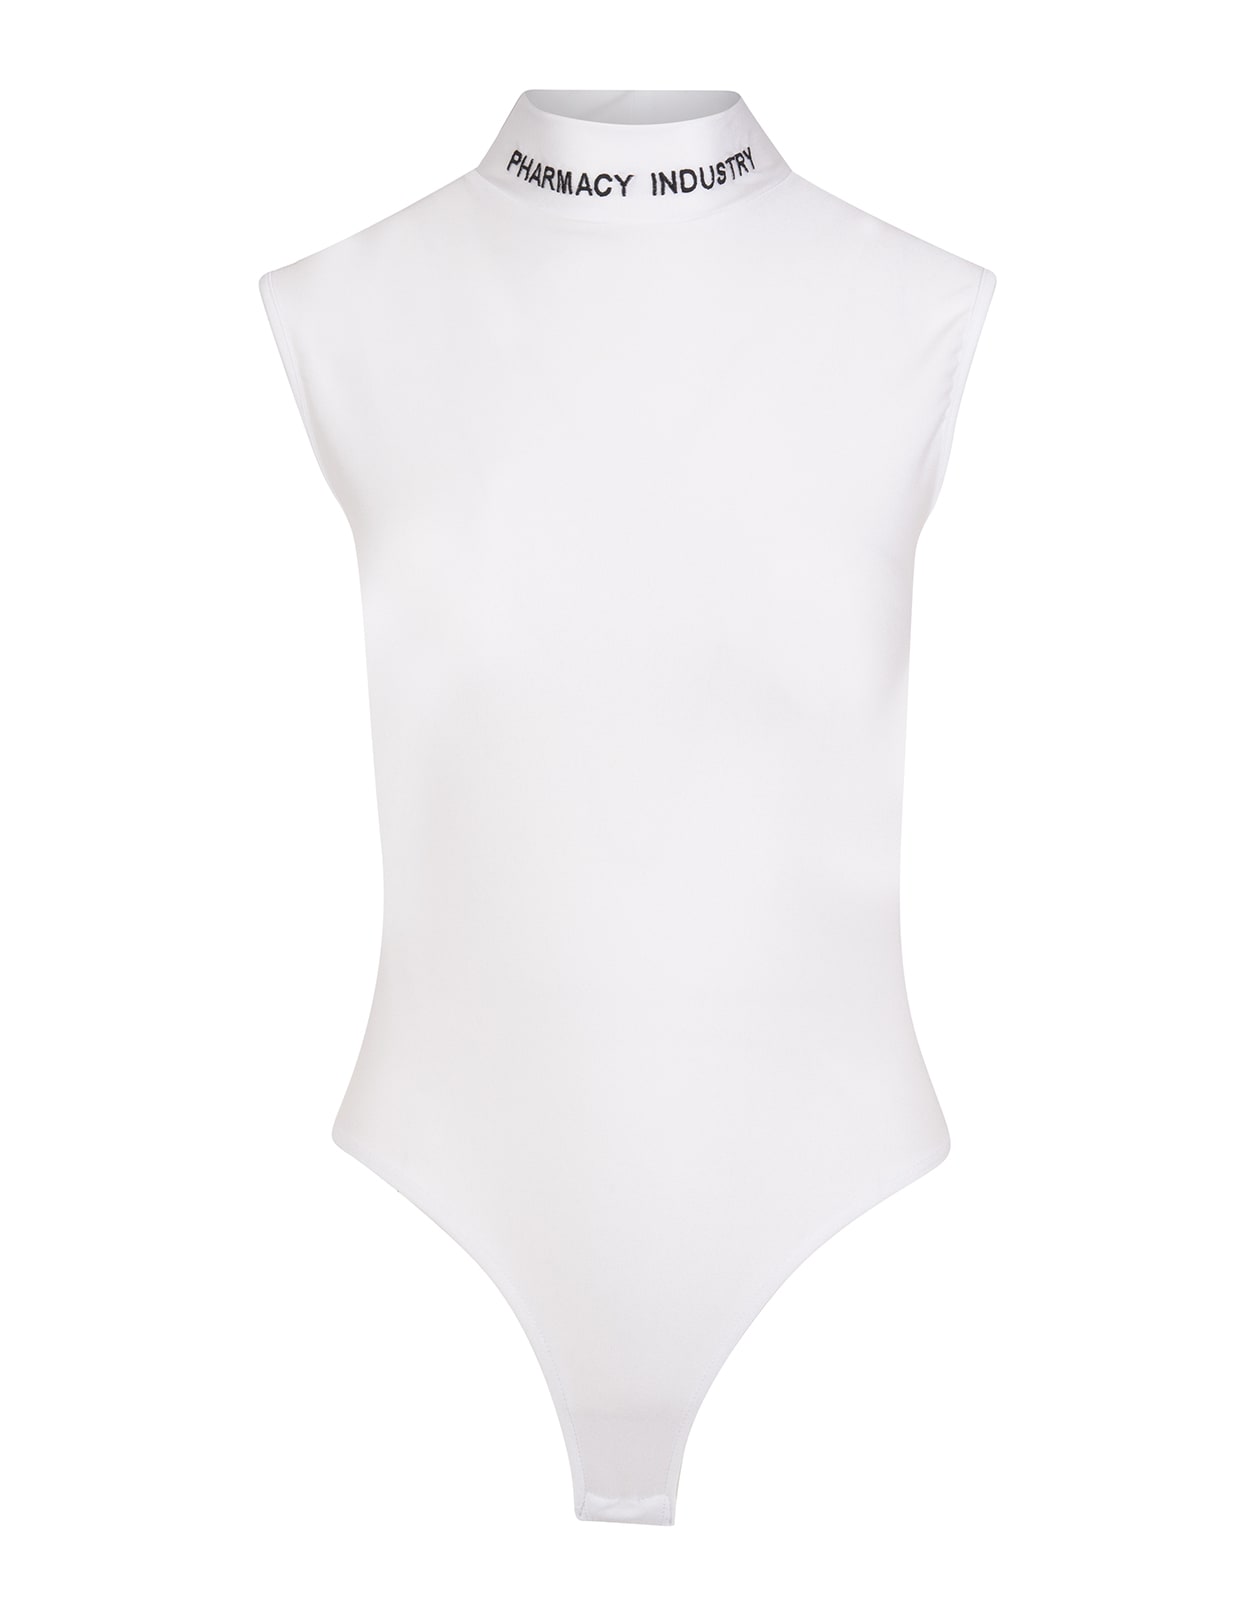 Pharmacy Industry Woman White Body Top With Logo On The Neck